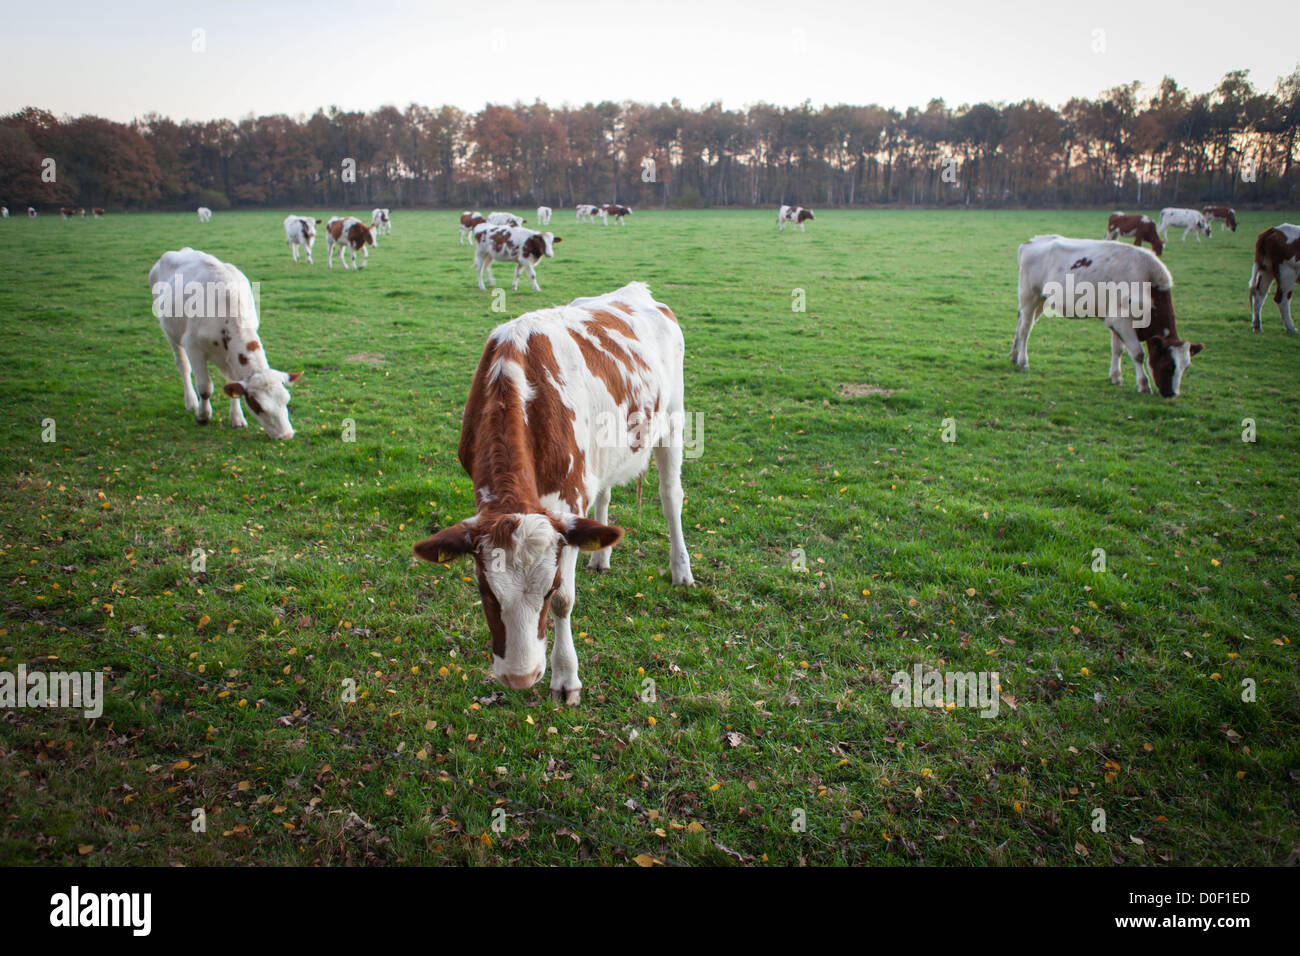 dutch landscape with dutch red holstein cows agriculture cattle Stock Photo